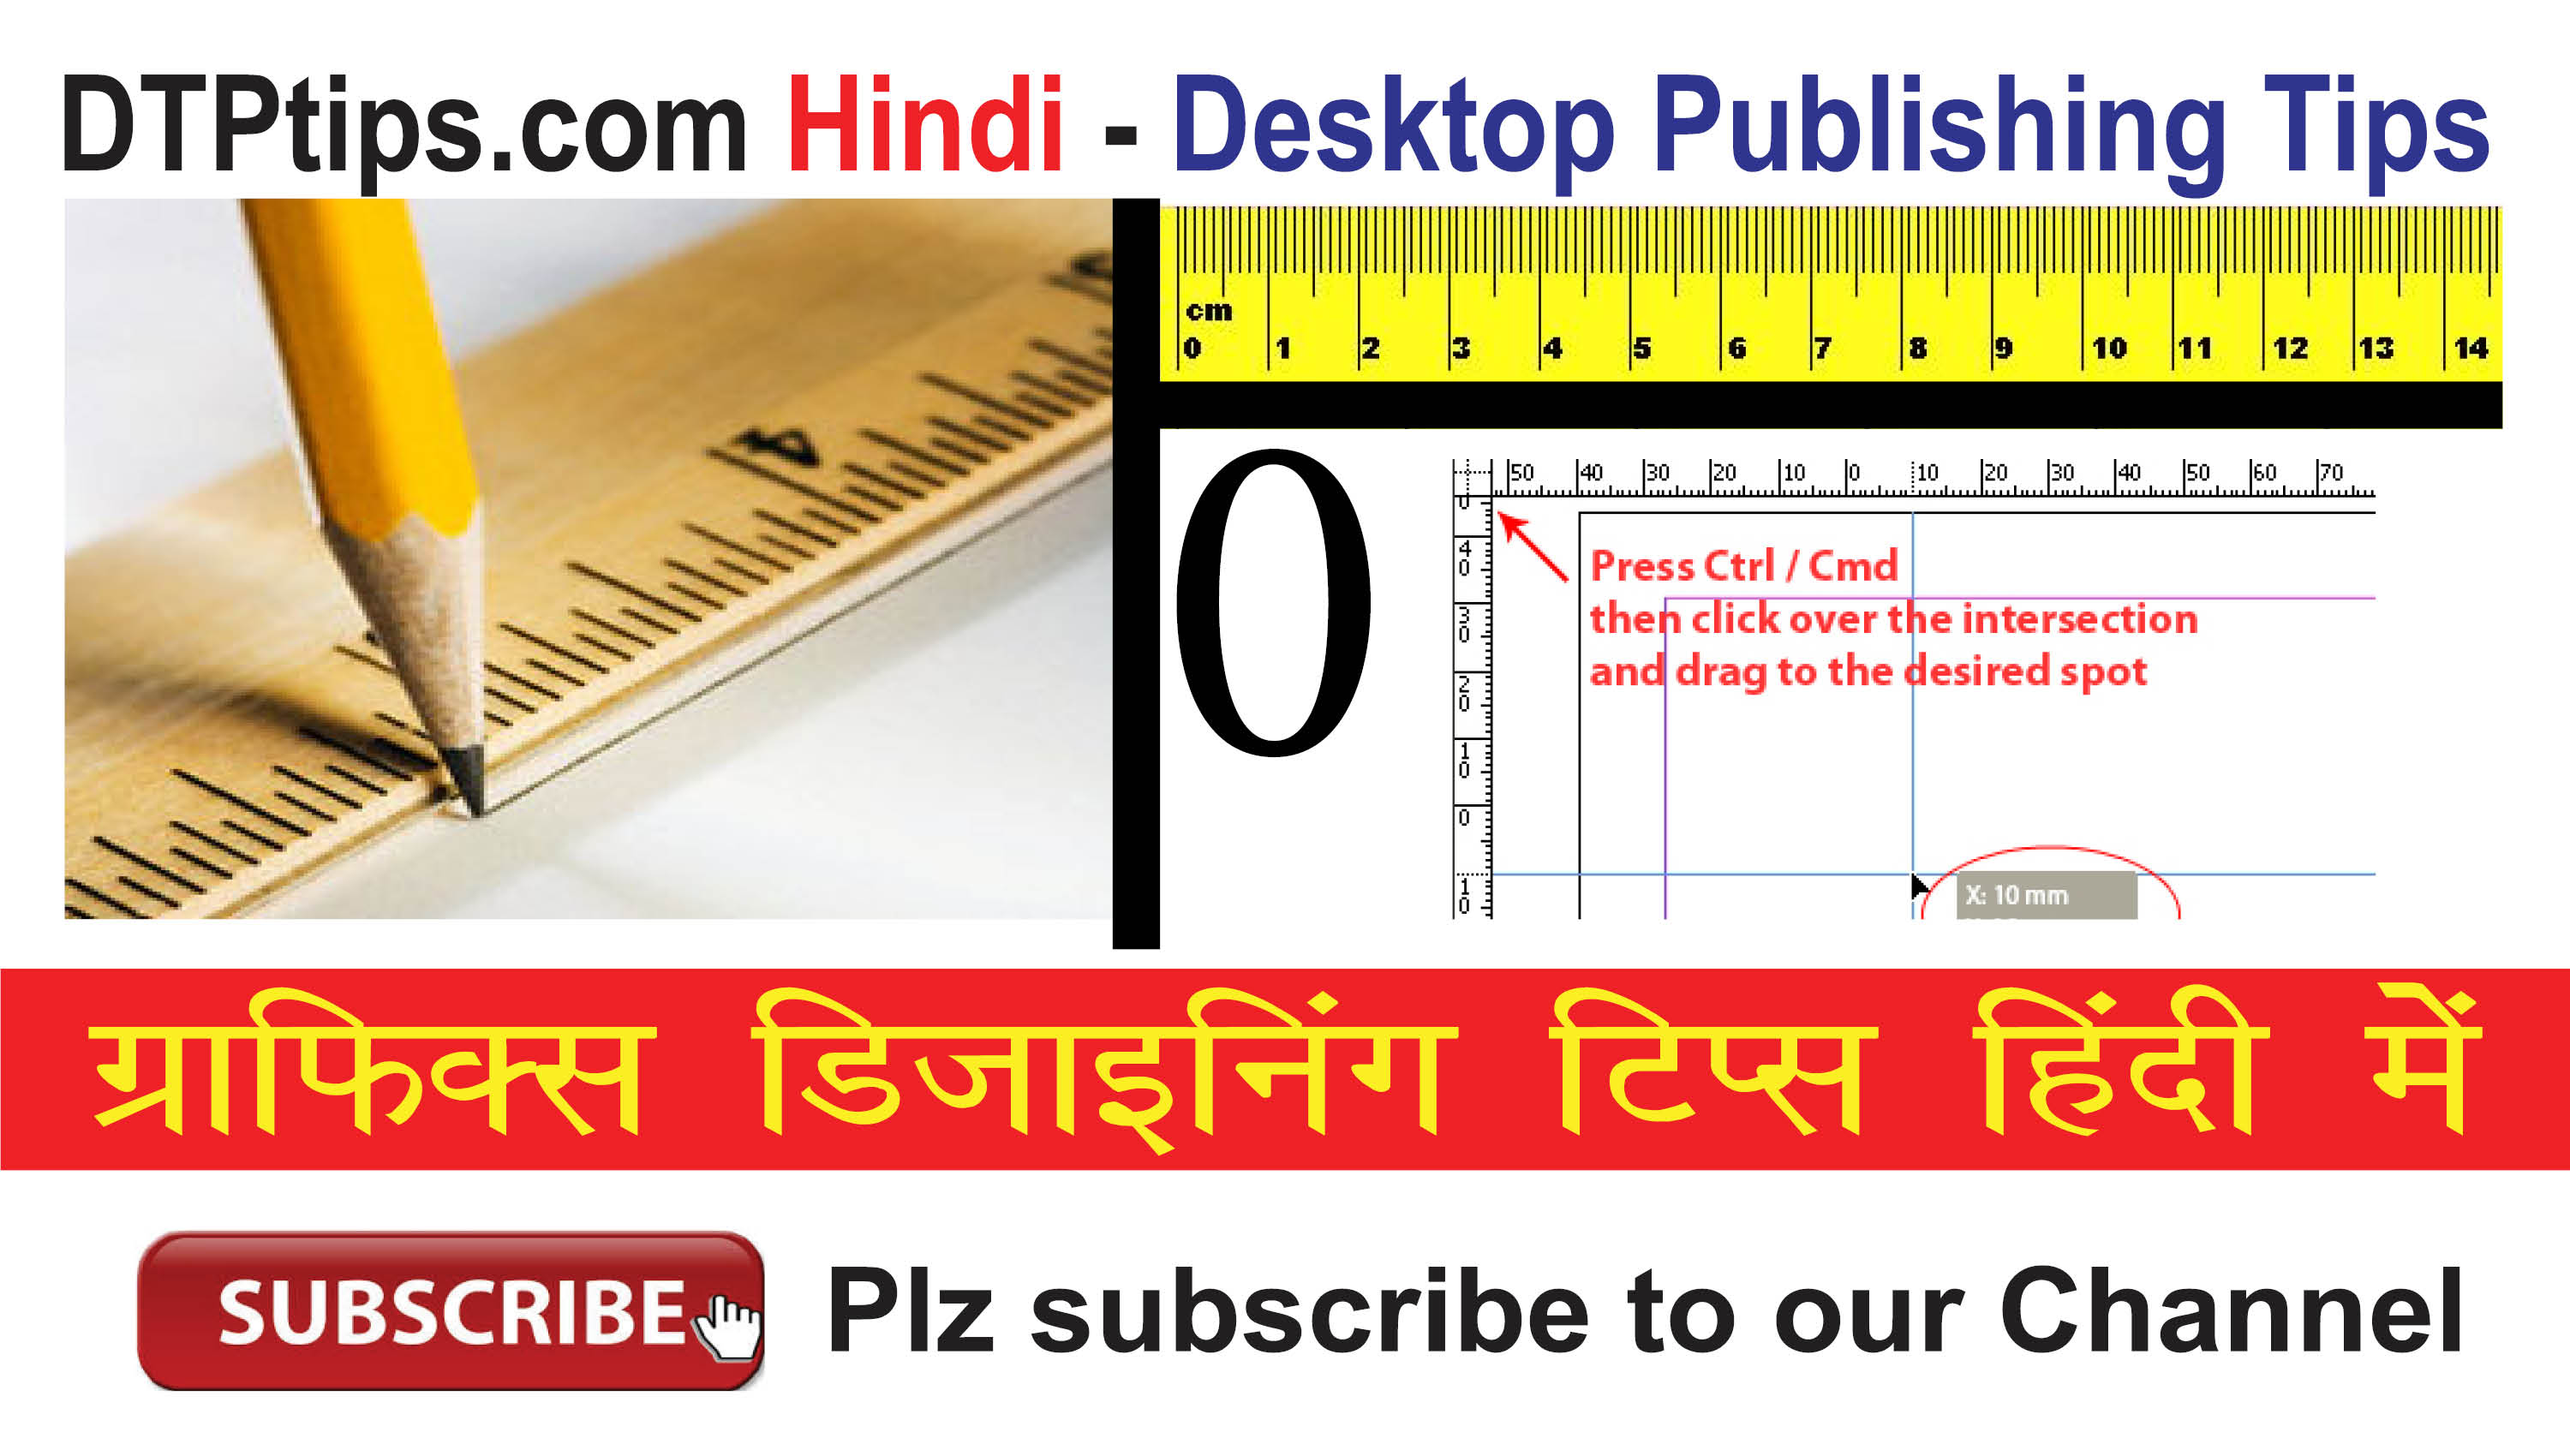 Rulers and Zero Point in Indesign: Learn Indesign in Hindi